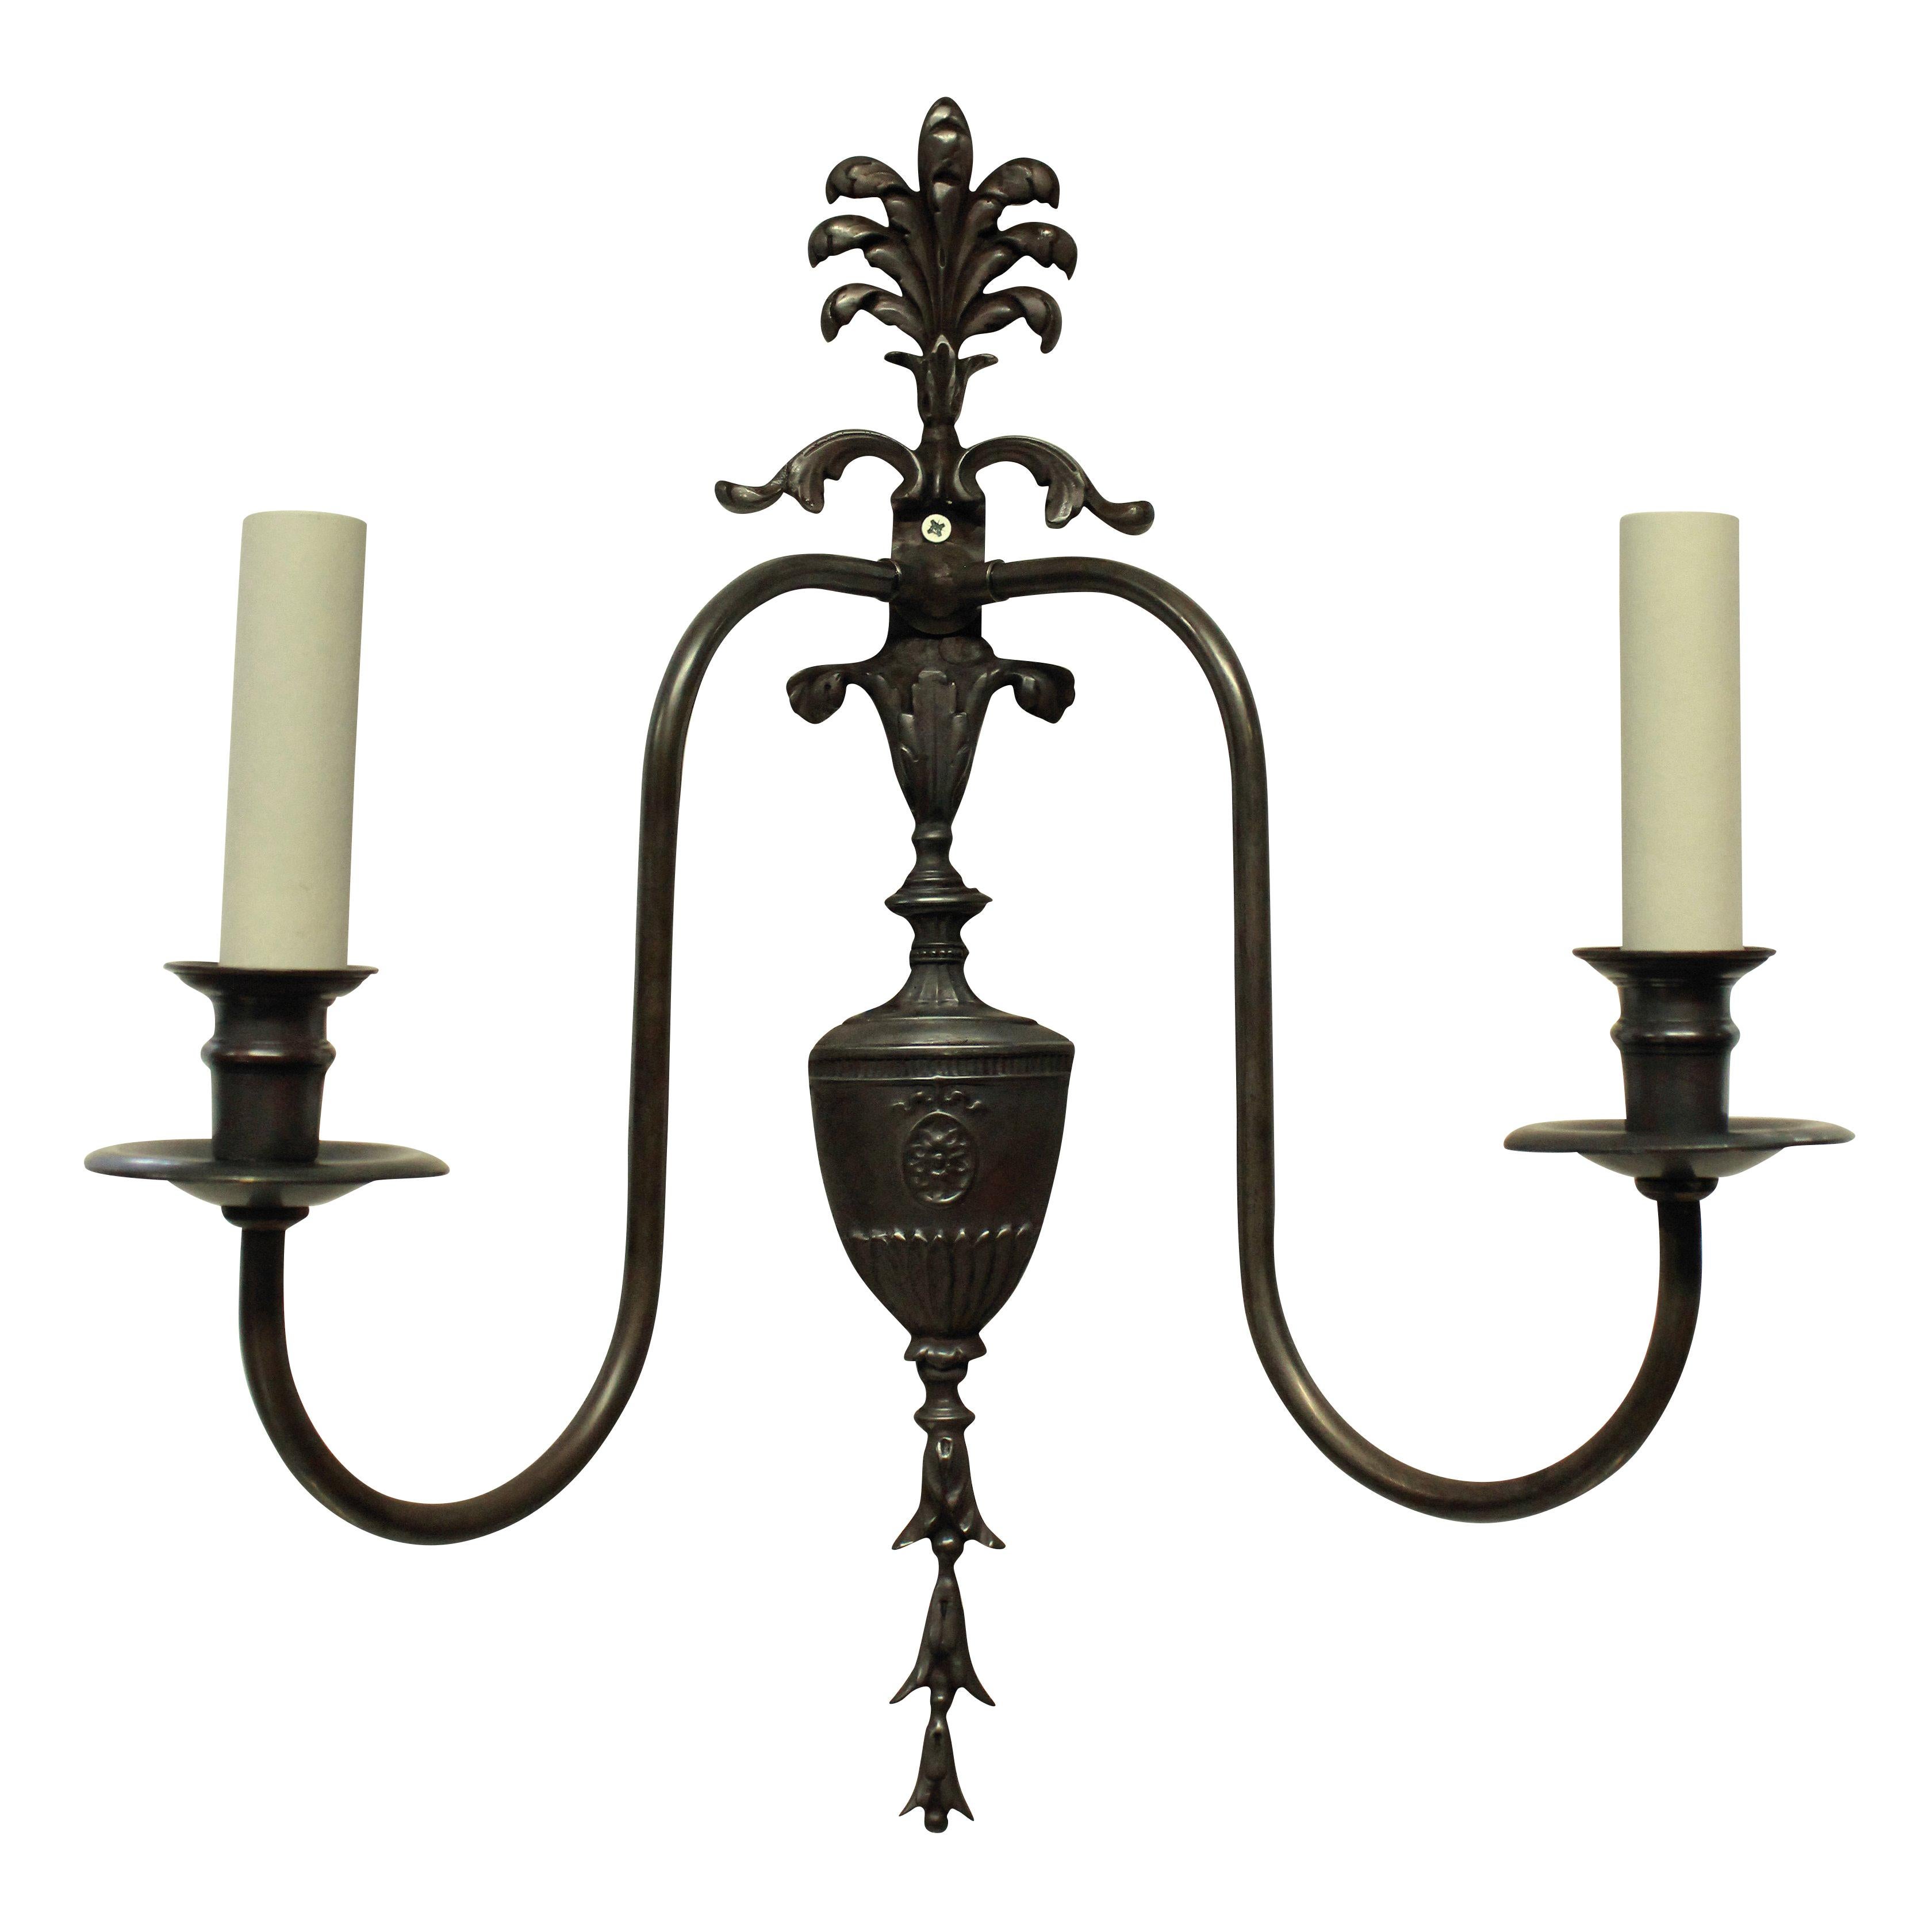 A set of eight English Edwardian Adam style bracket twin branch wall sconces in bronzed brass. Four more available.